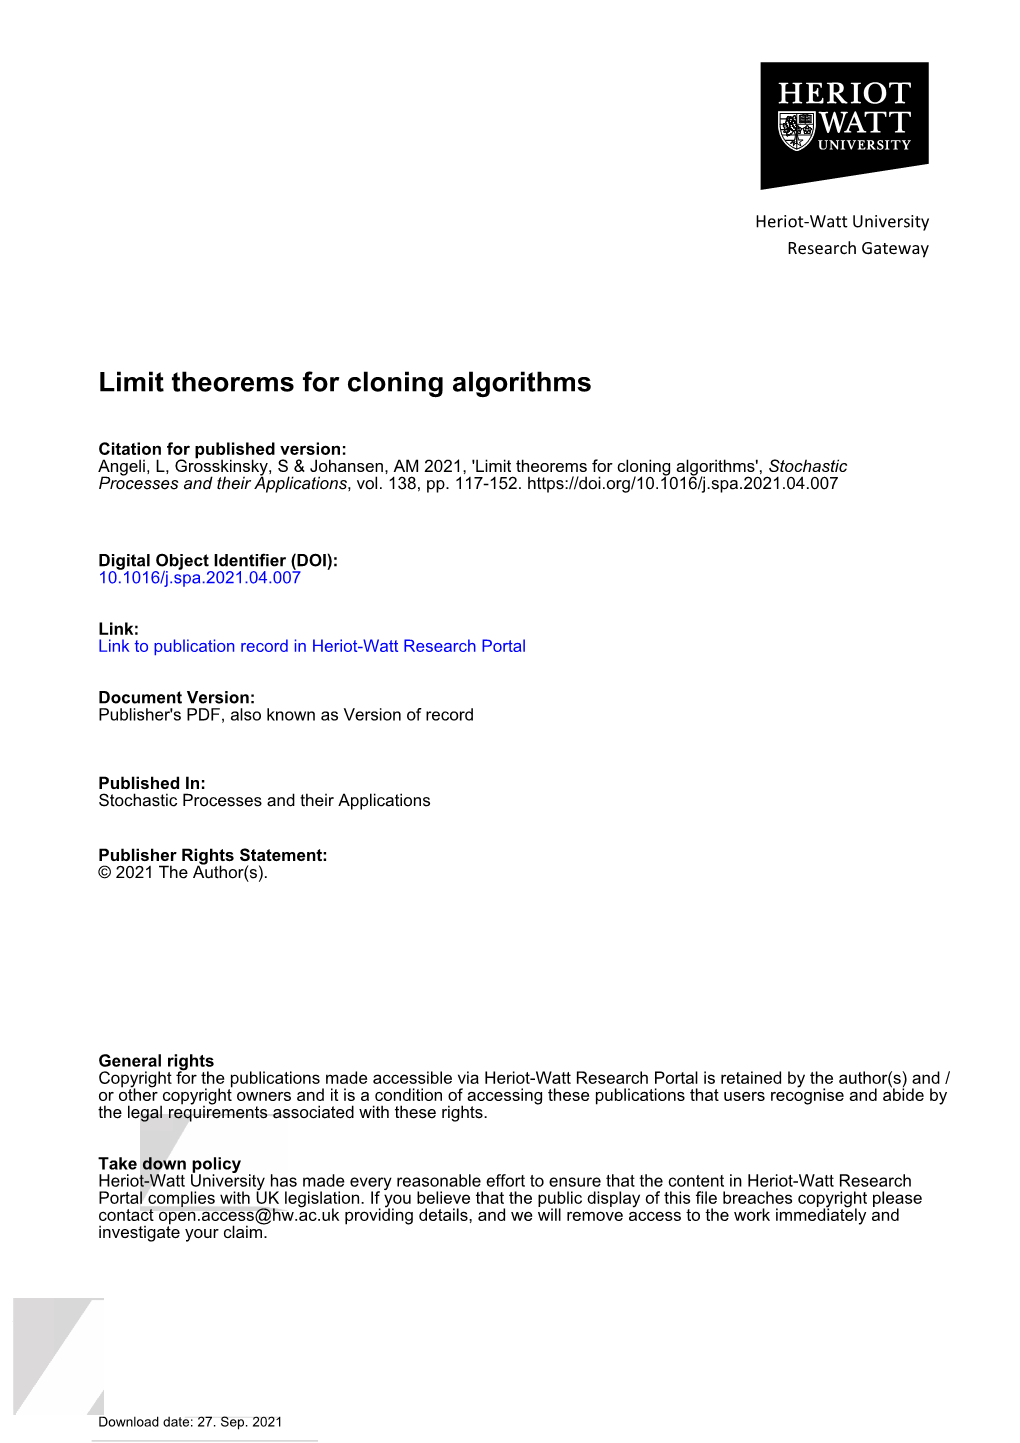 Limit Theorems for Cloning Algorithms